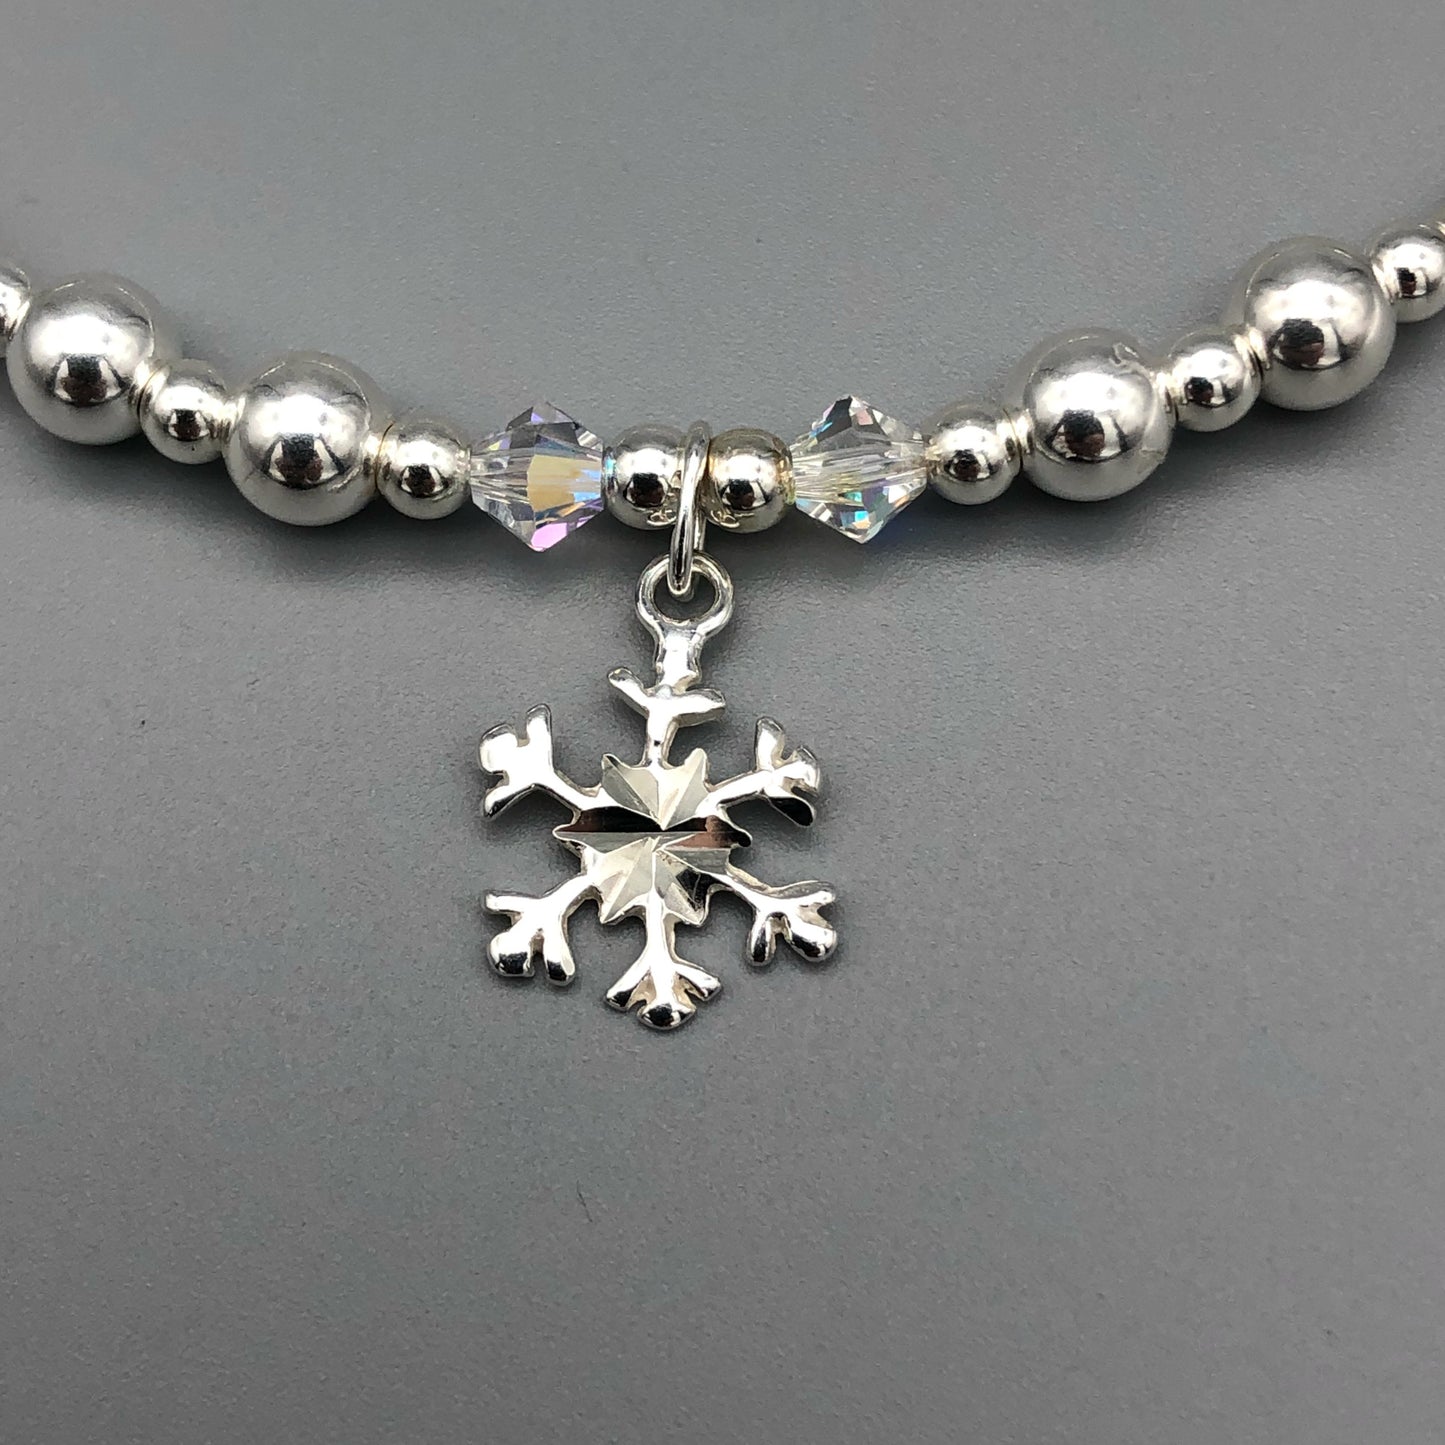 Closeup of Snowflake charm sterling silver hand-made women's stacking bracelet by My Silver Wish